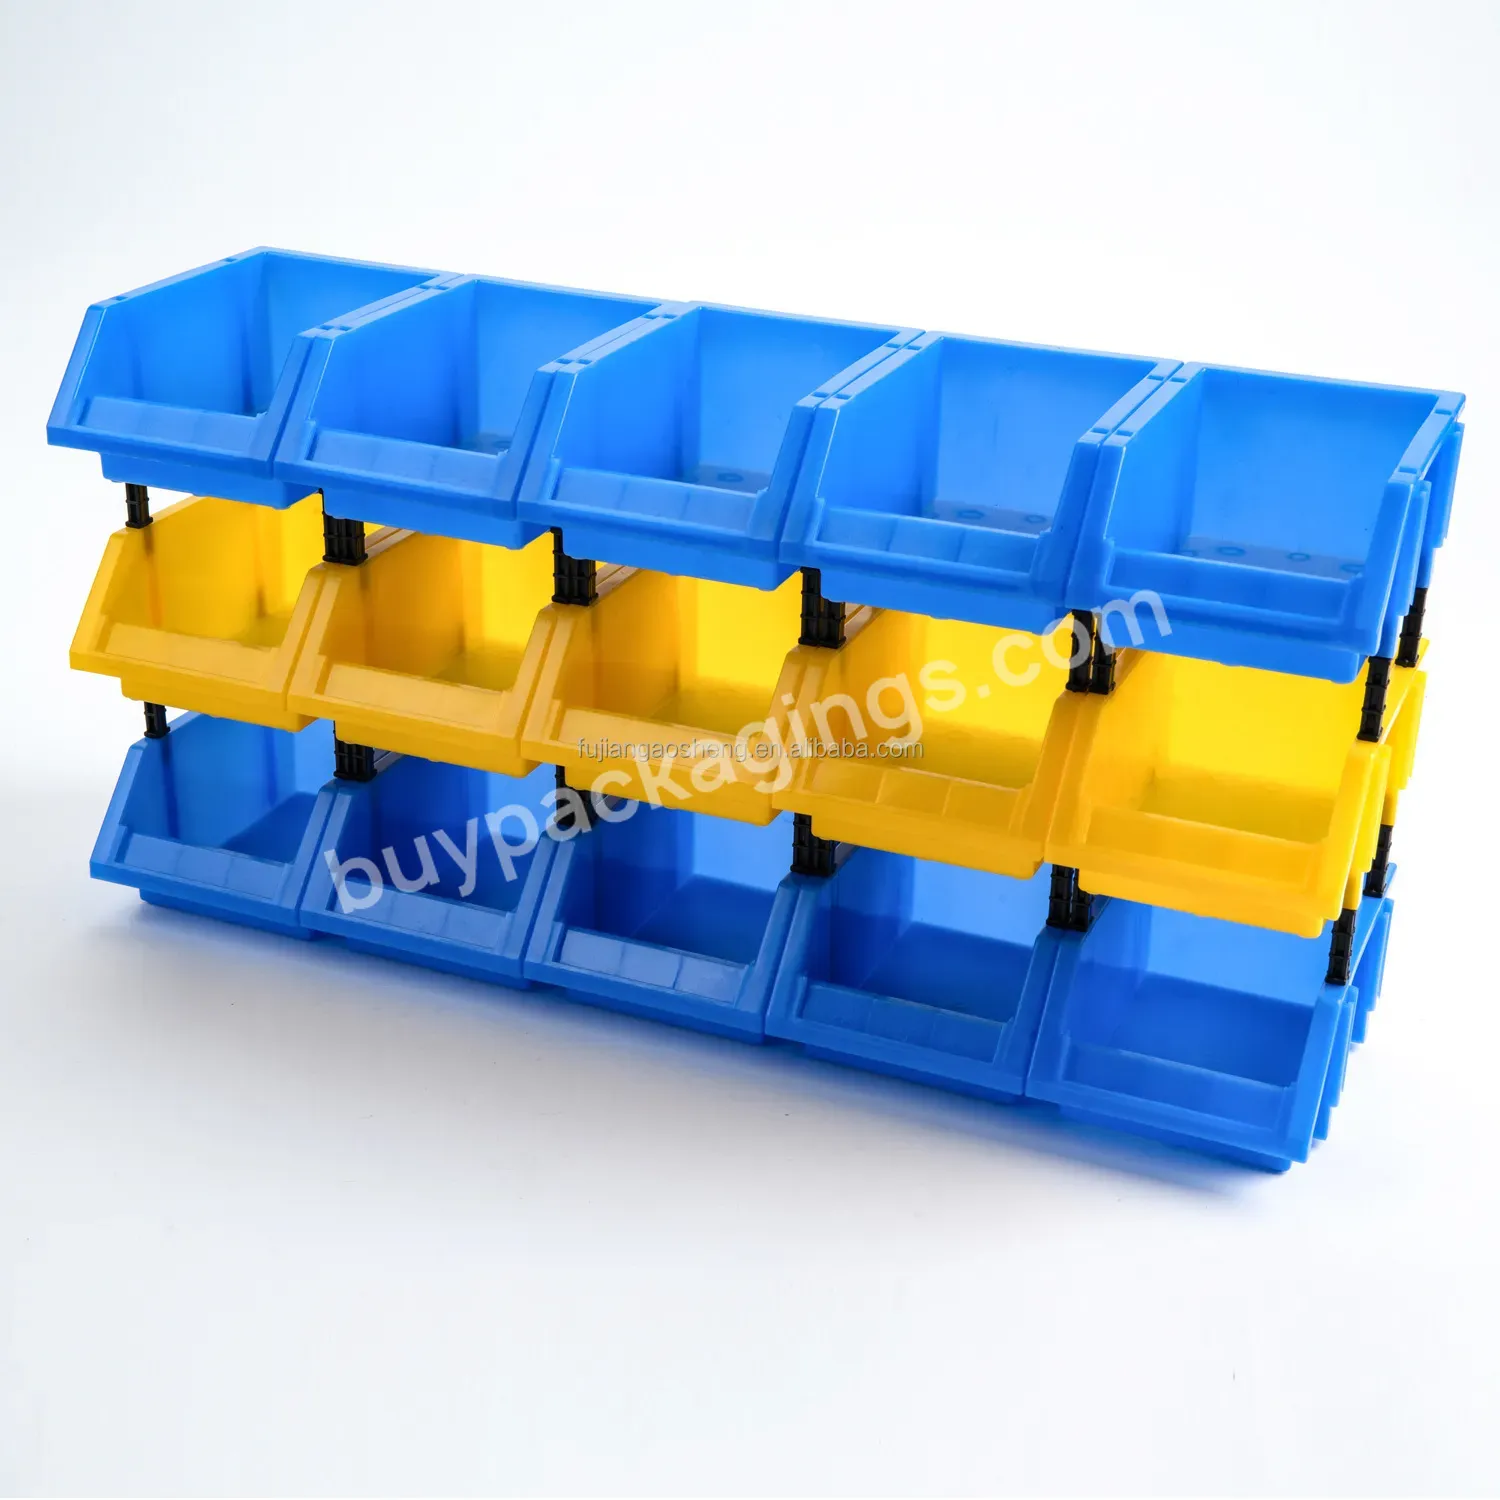 Cheap Price Spare Part Shelf Bins For Industrial Plastic Portable Boxes Plastic Stackable And Divisible Storage Shelf Bins - Buy Kids Plastic Storage Bins,Cheap Plastic Storage Bins,Stackable Bread Bin.